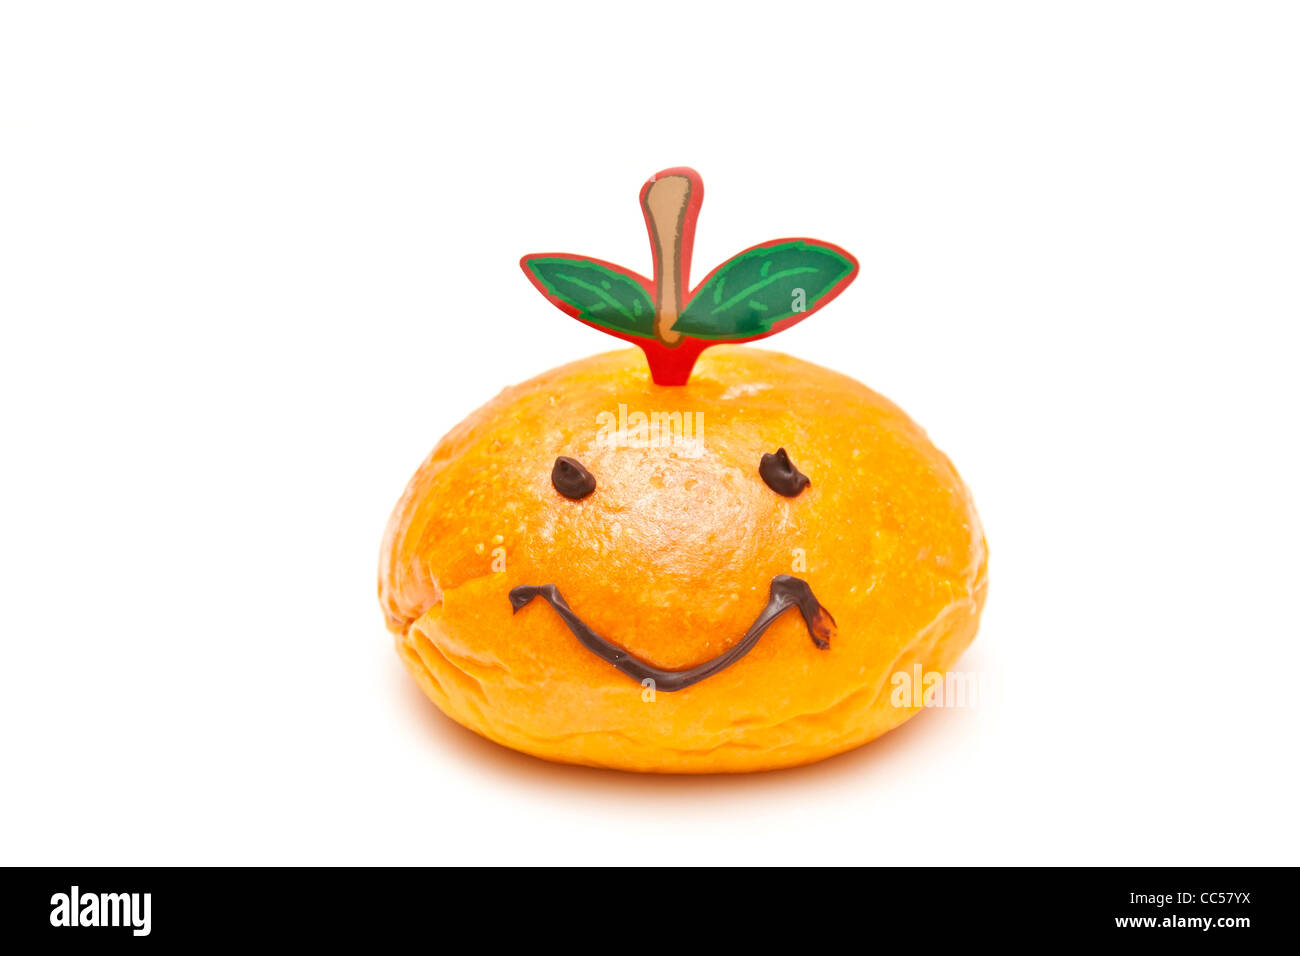 Smiley face bread, greet for Chinese New Year. Stock Photo